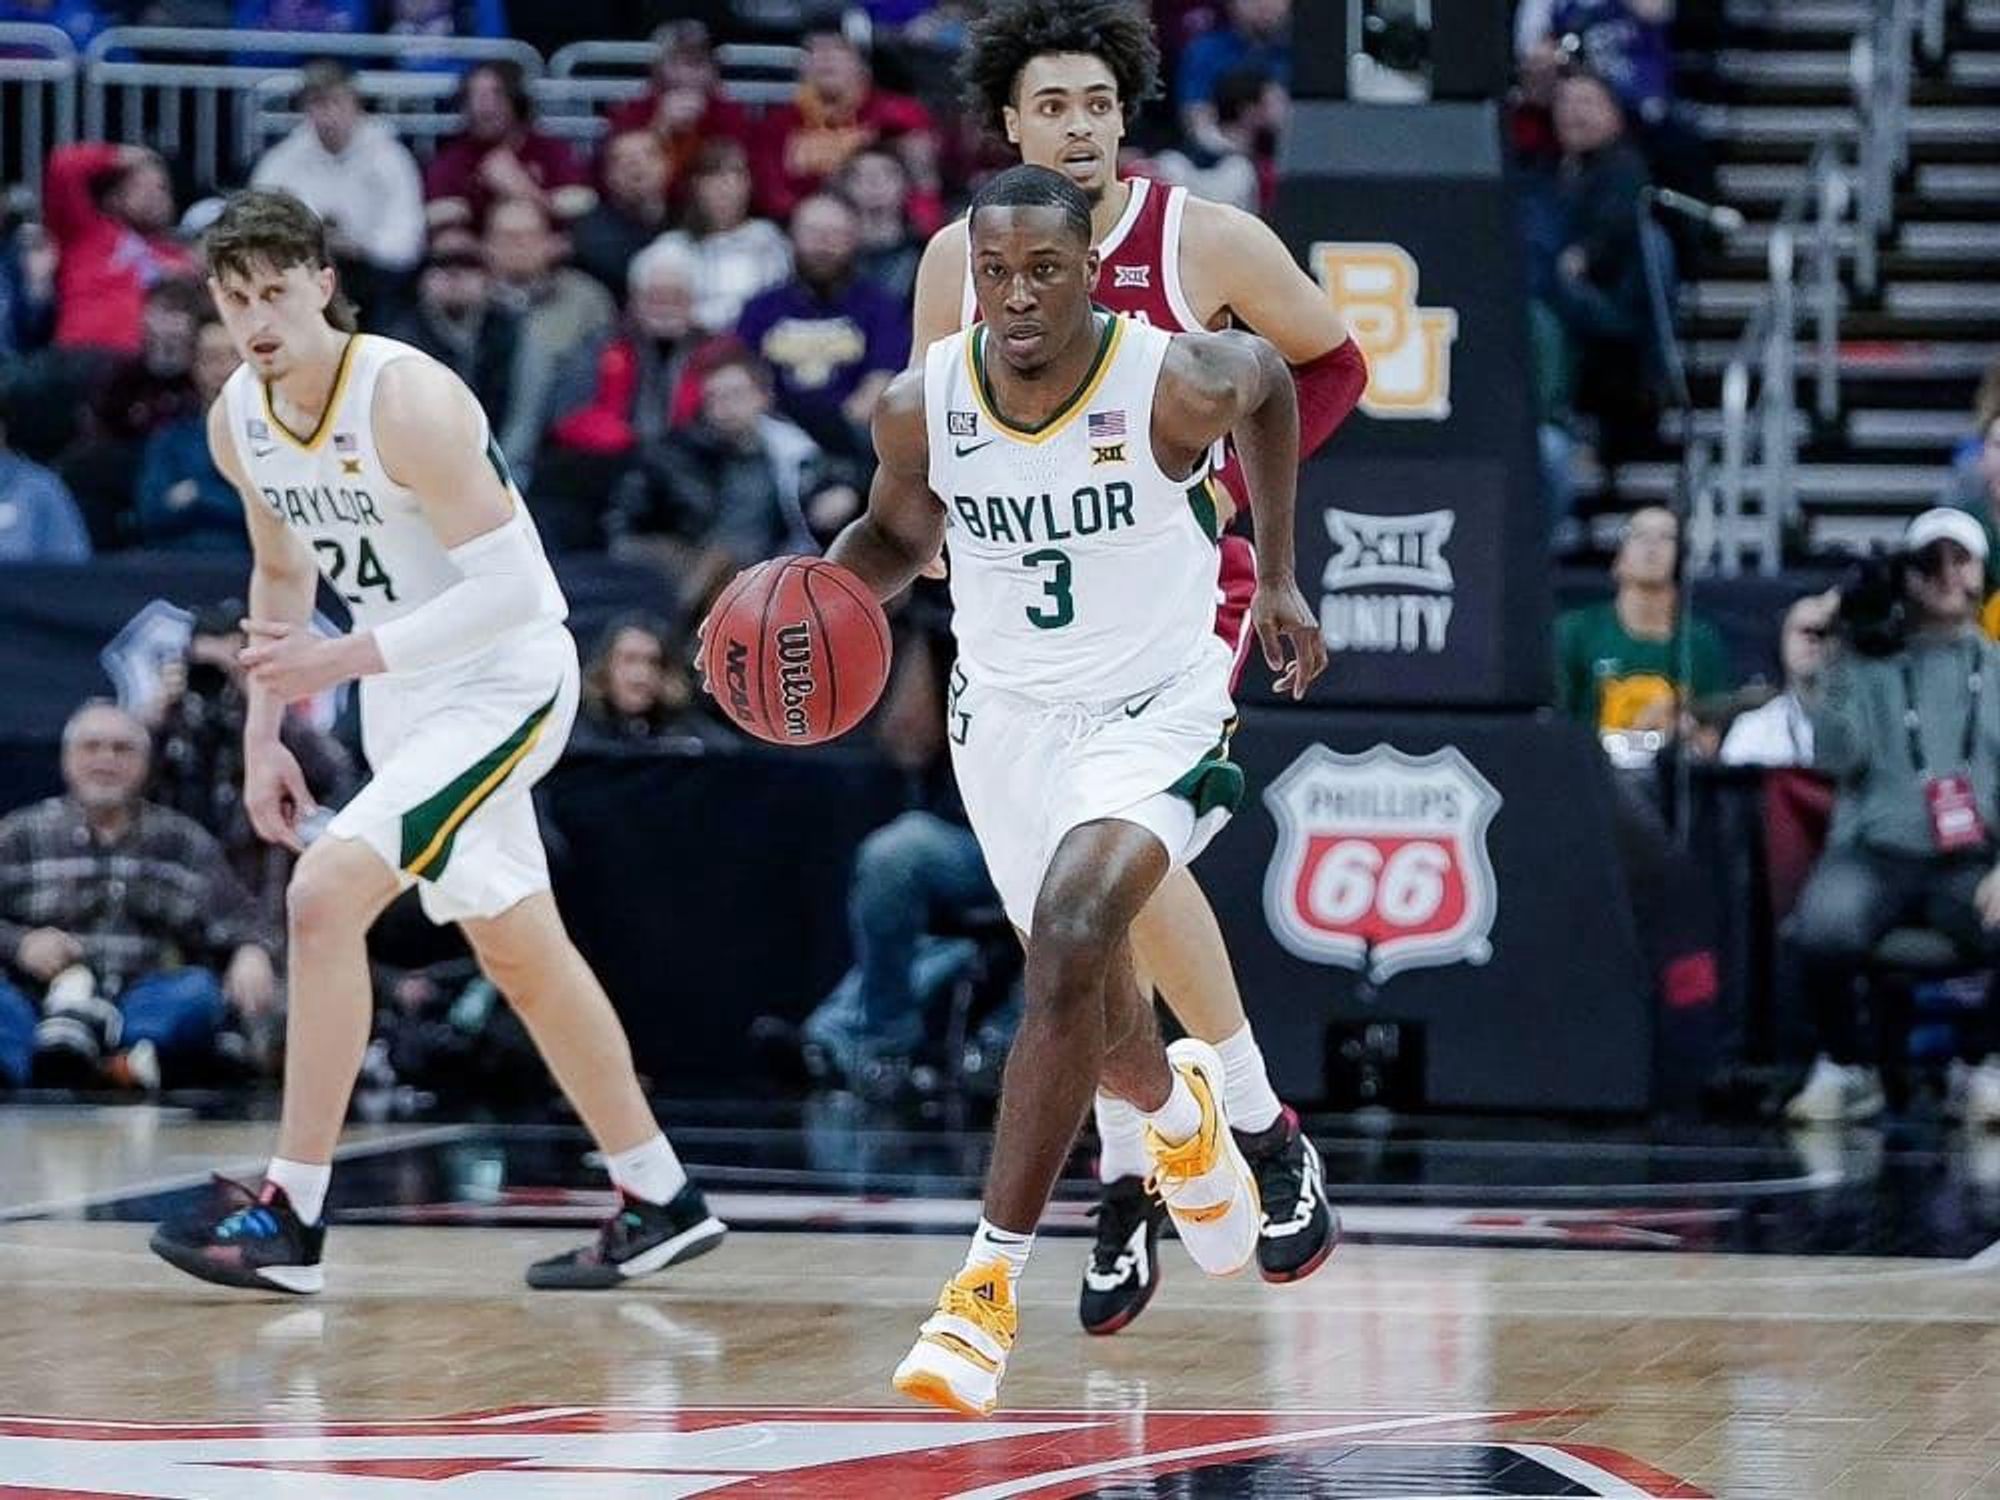 Defending national champion Baylor will start its title defense at Dickies Arena, as the arena hosts March Madness games on March 17 and 19.